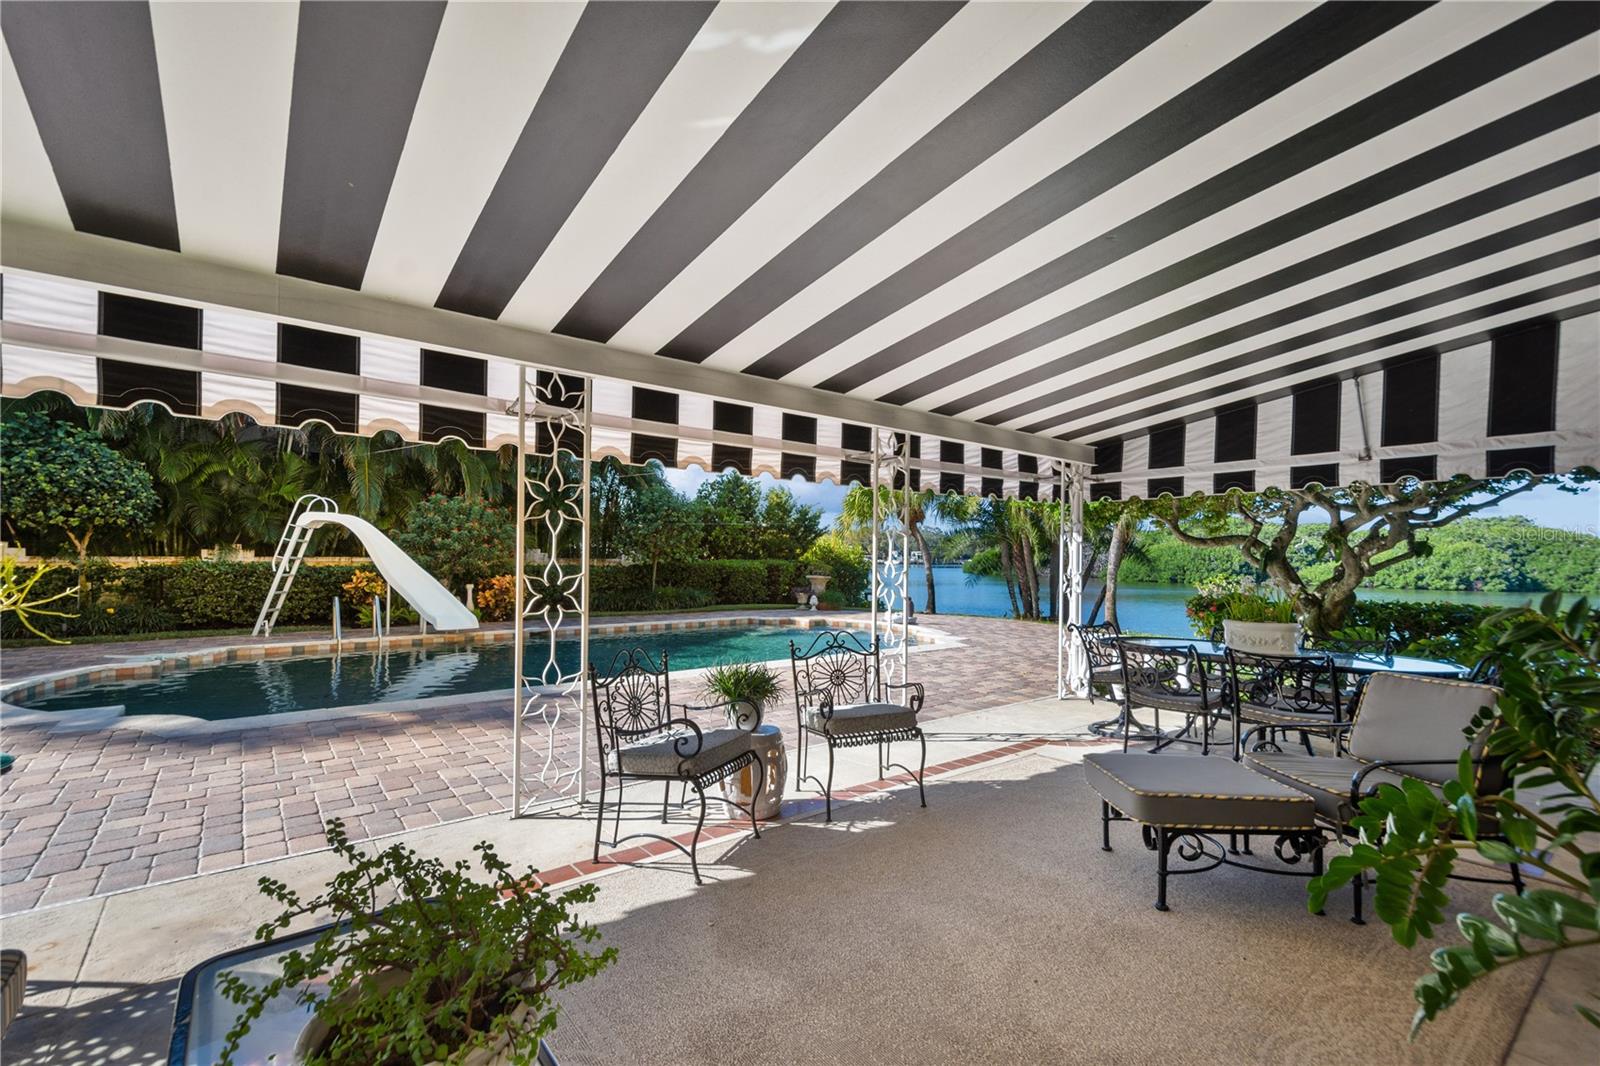 Expansive covered patio